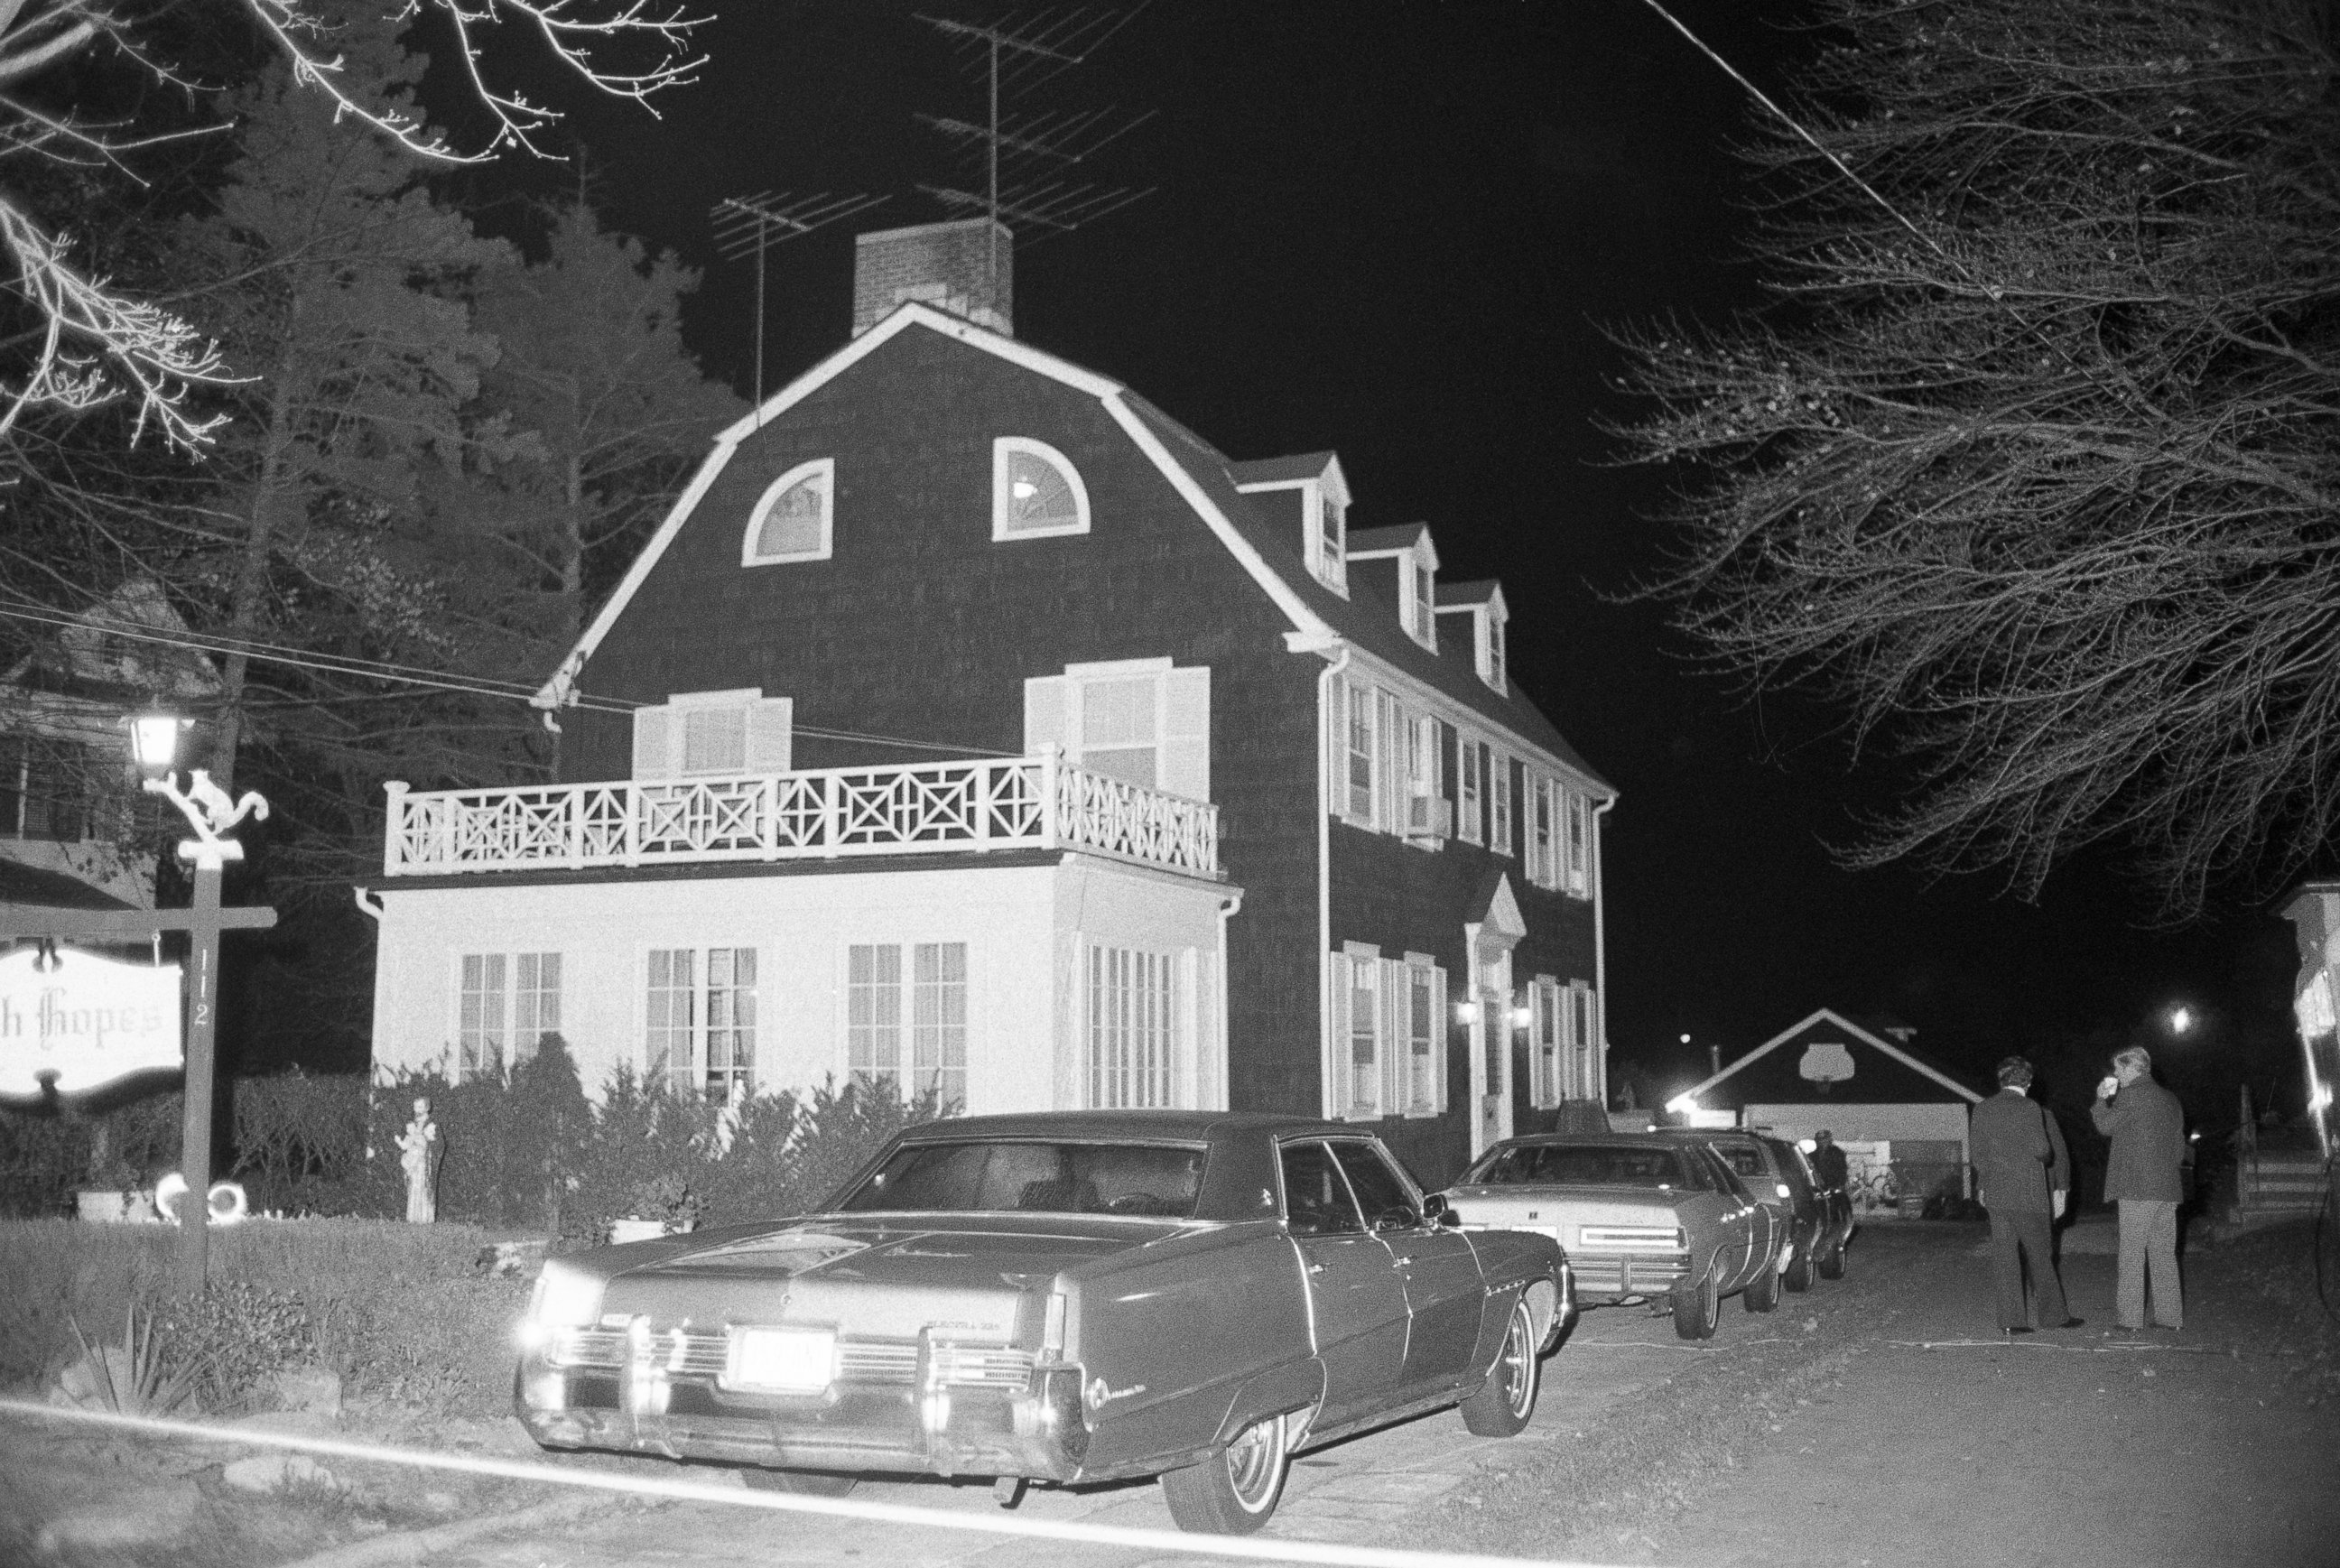 PHOTO: A view of the home of Ronald DeFeo Sr., the car salesman, his wife, two daughters and two sons were found shot to death on Nov. 11, 1974 is seen here.